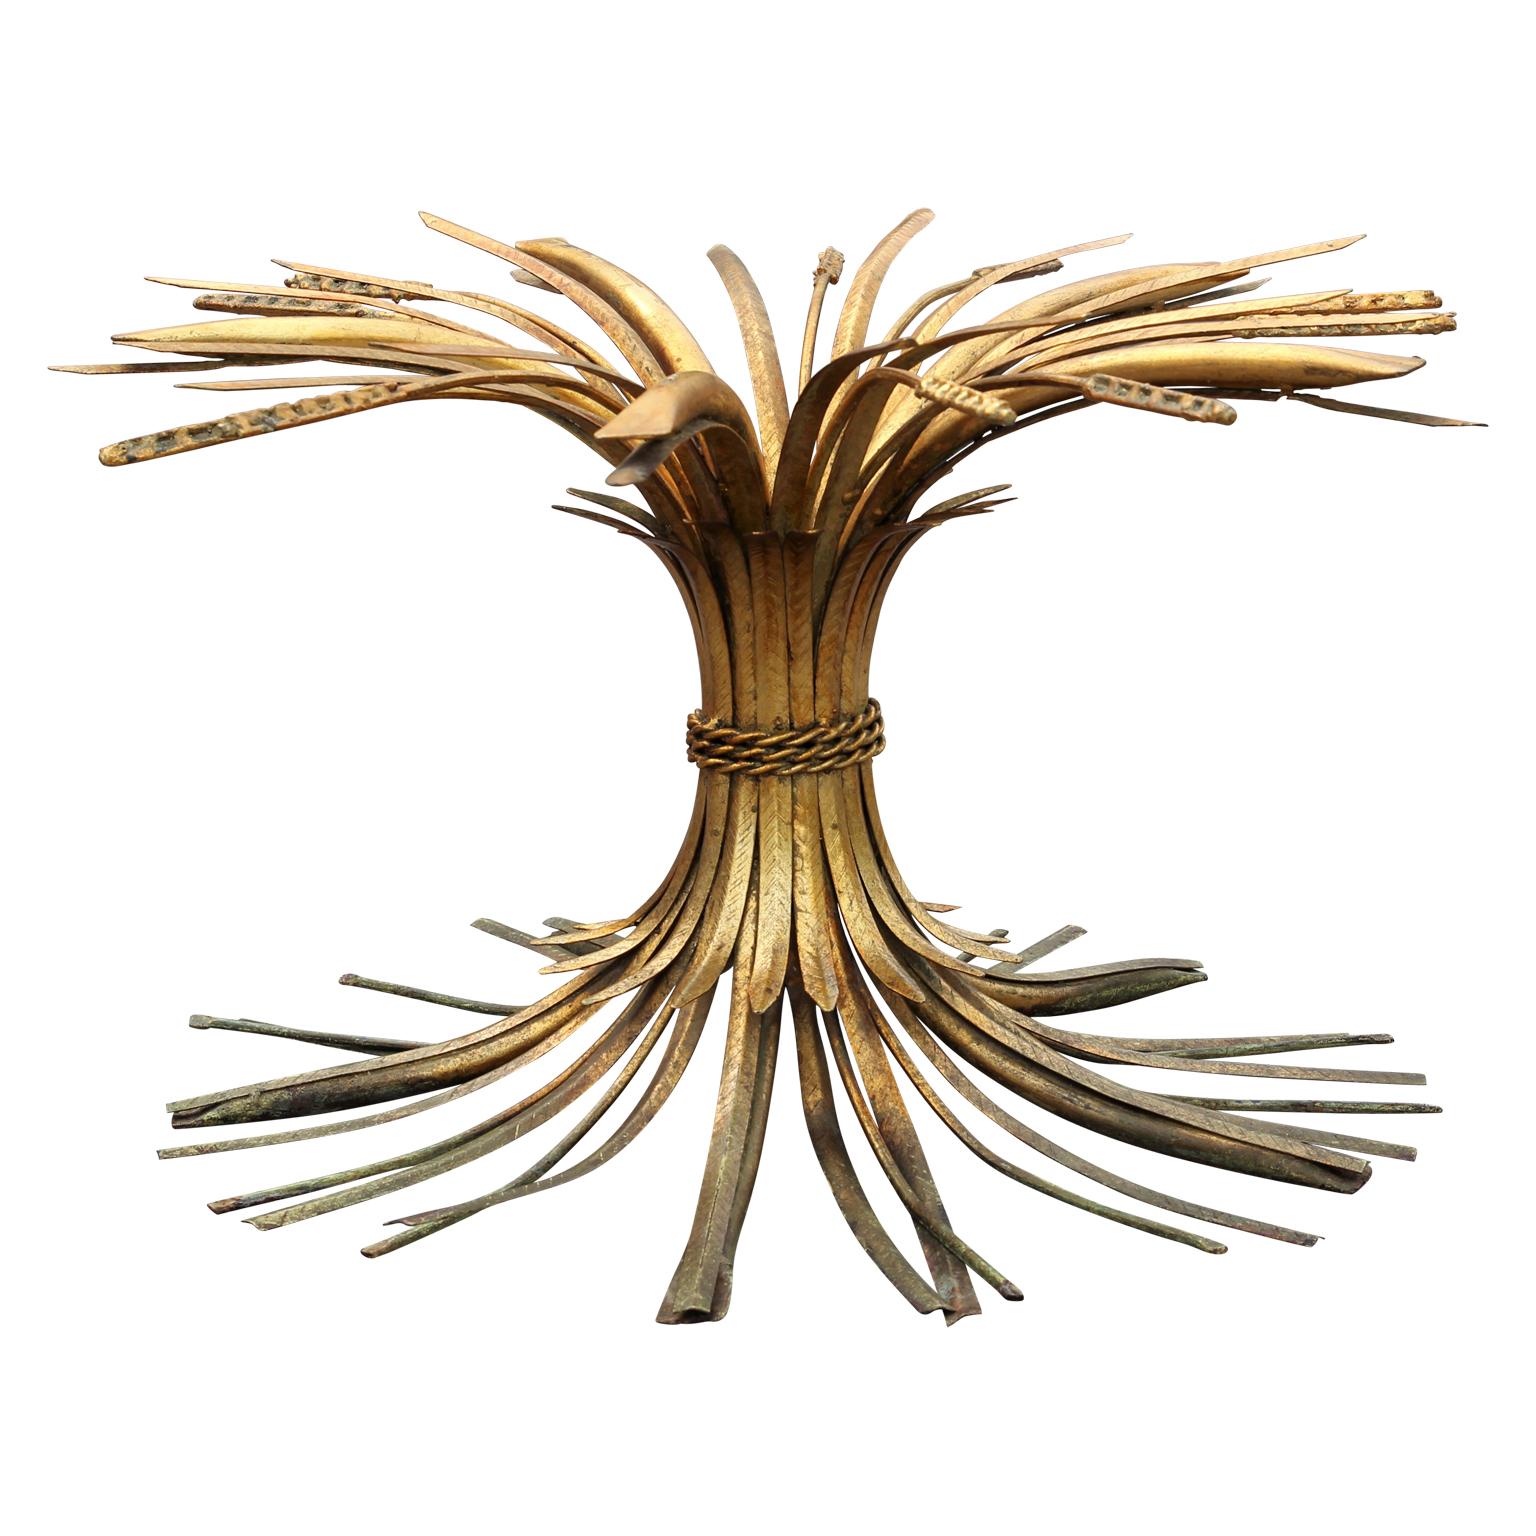 European Italian Wheat Sheaf Side Table in Antique Gold Finish with Round Glass Top